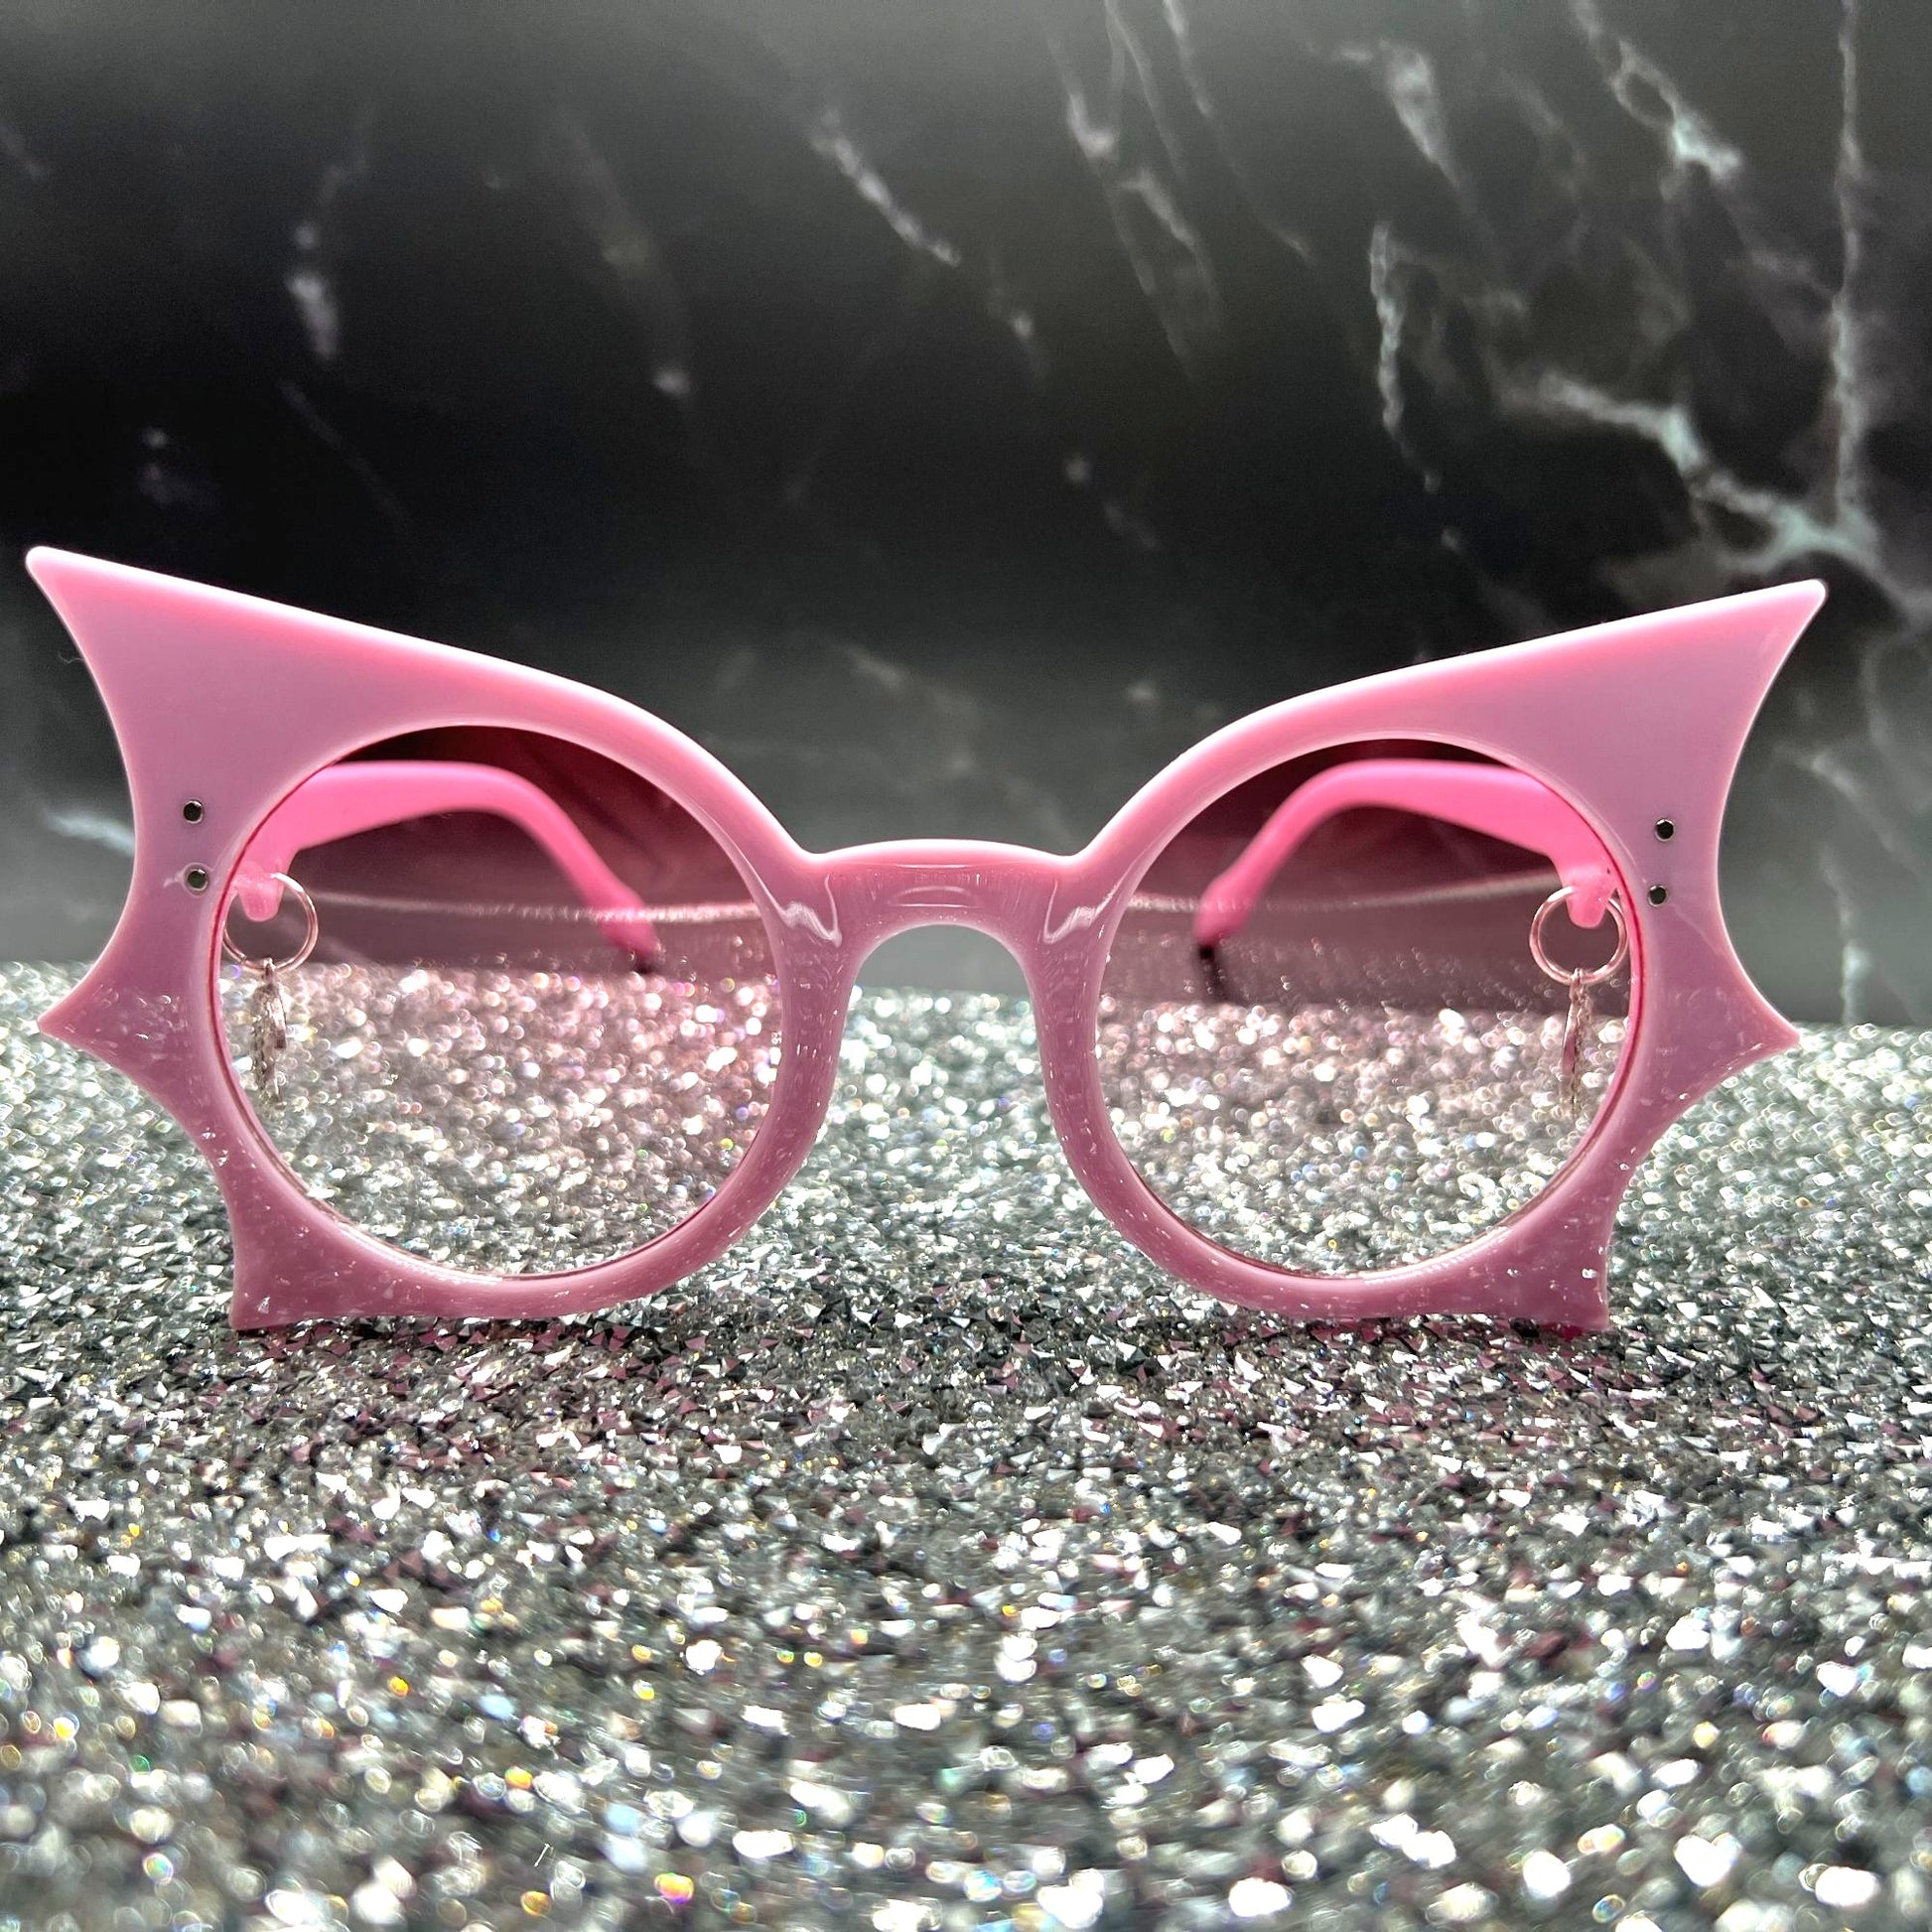 "Pastel pink bat sunglasses with moon charms. Displayed on a glittery table.